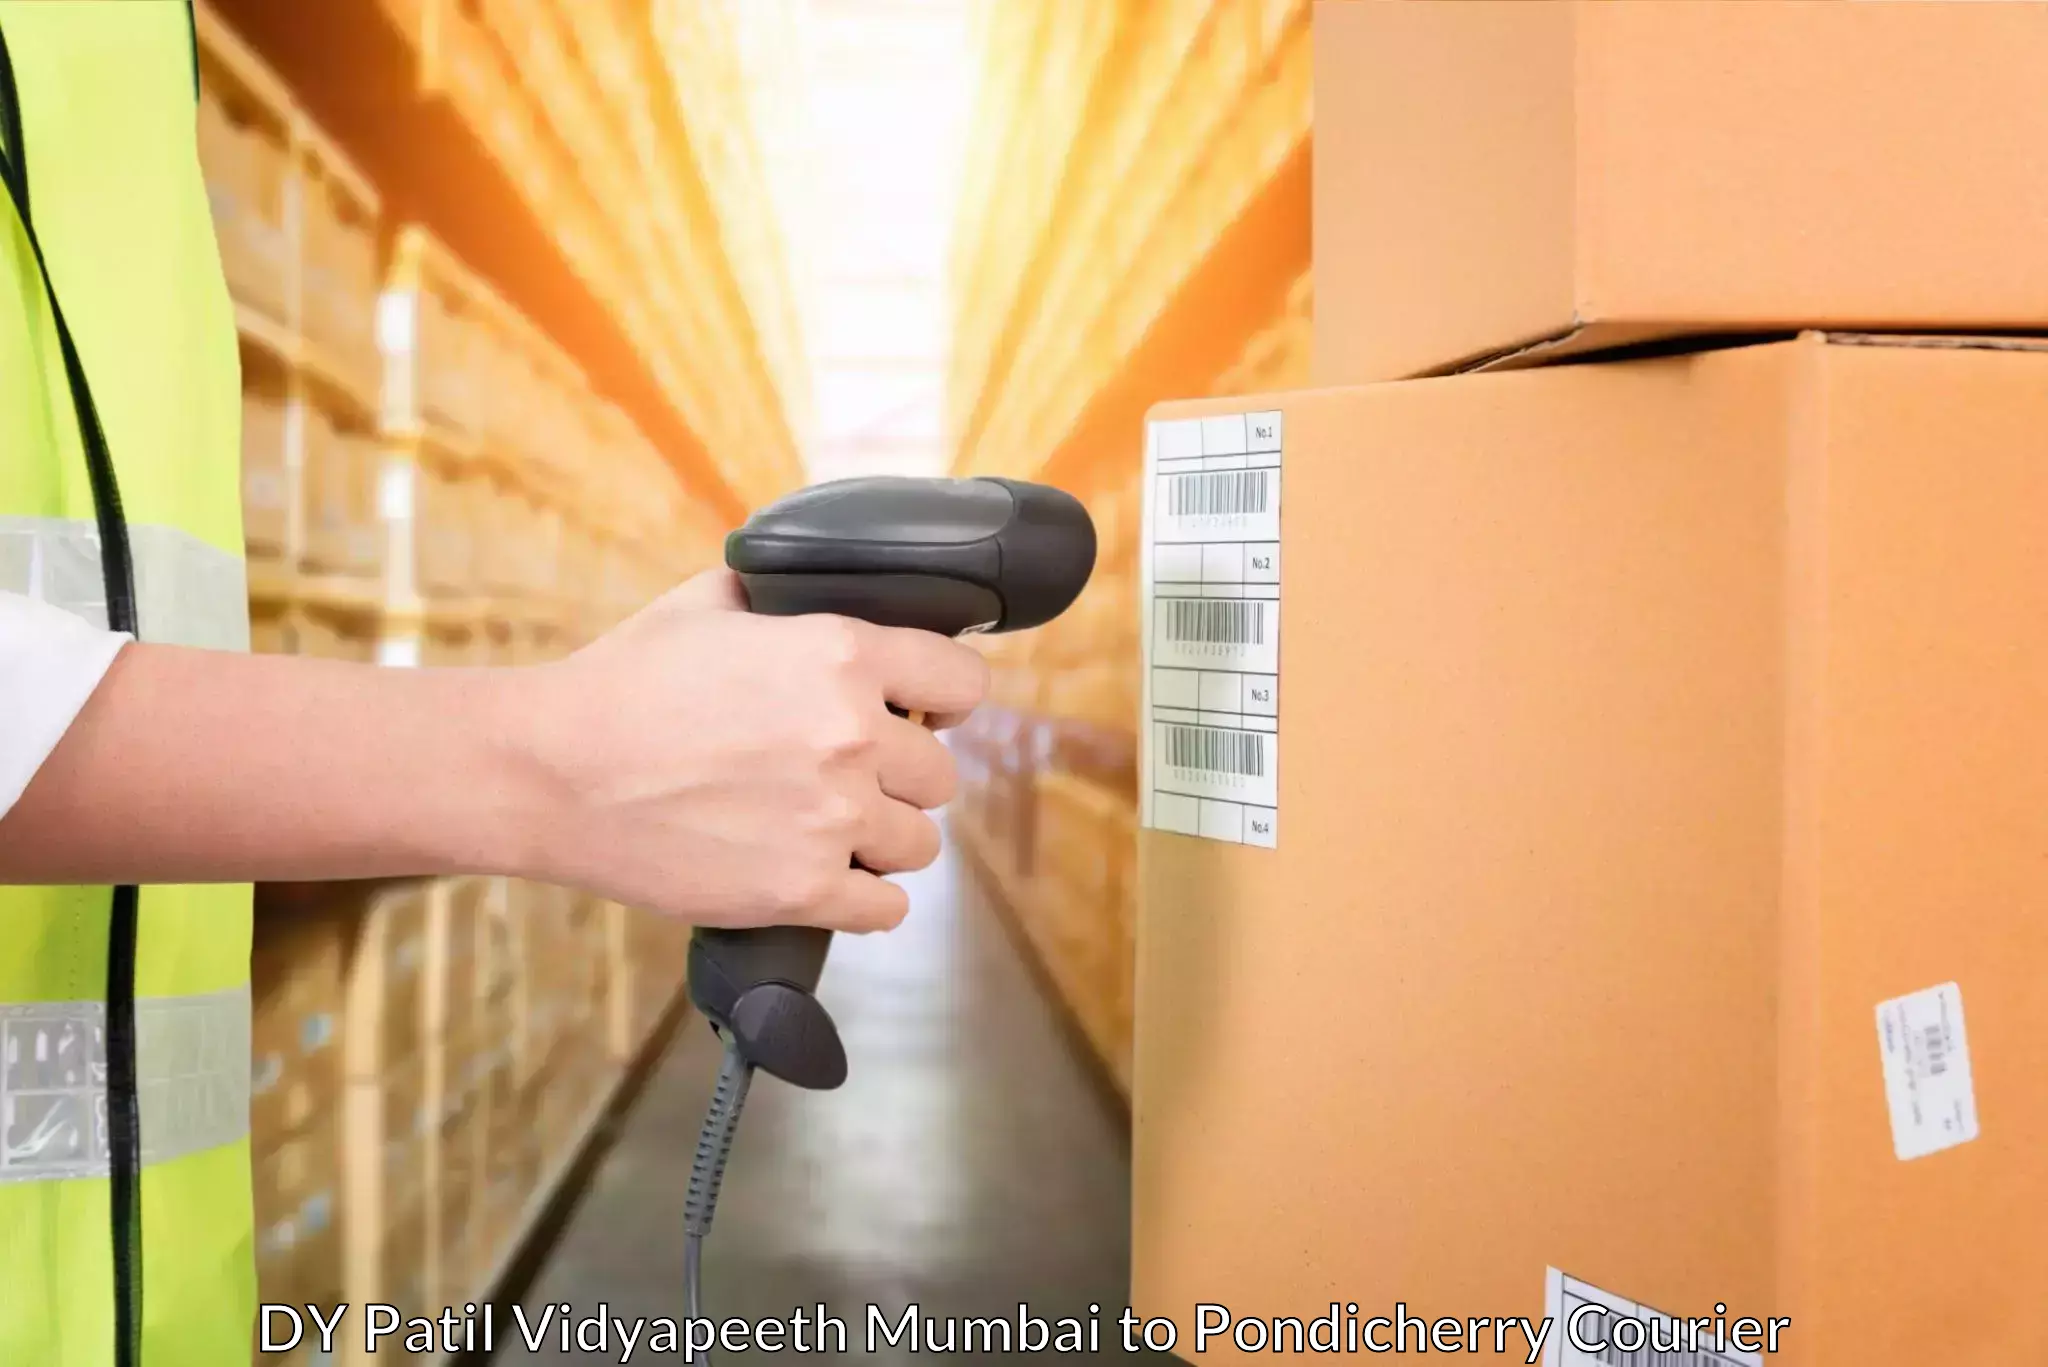 Multi-national courier services DY Patil Vidyapeeth Mumbai to Pondicherry